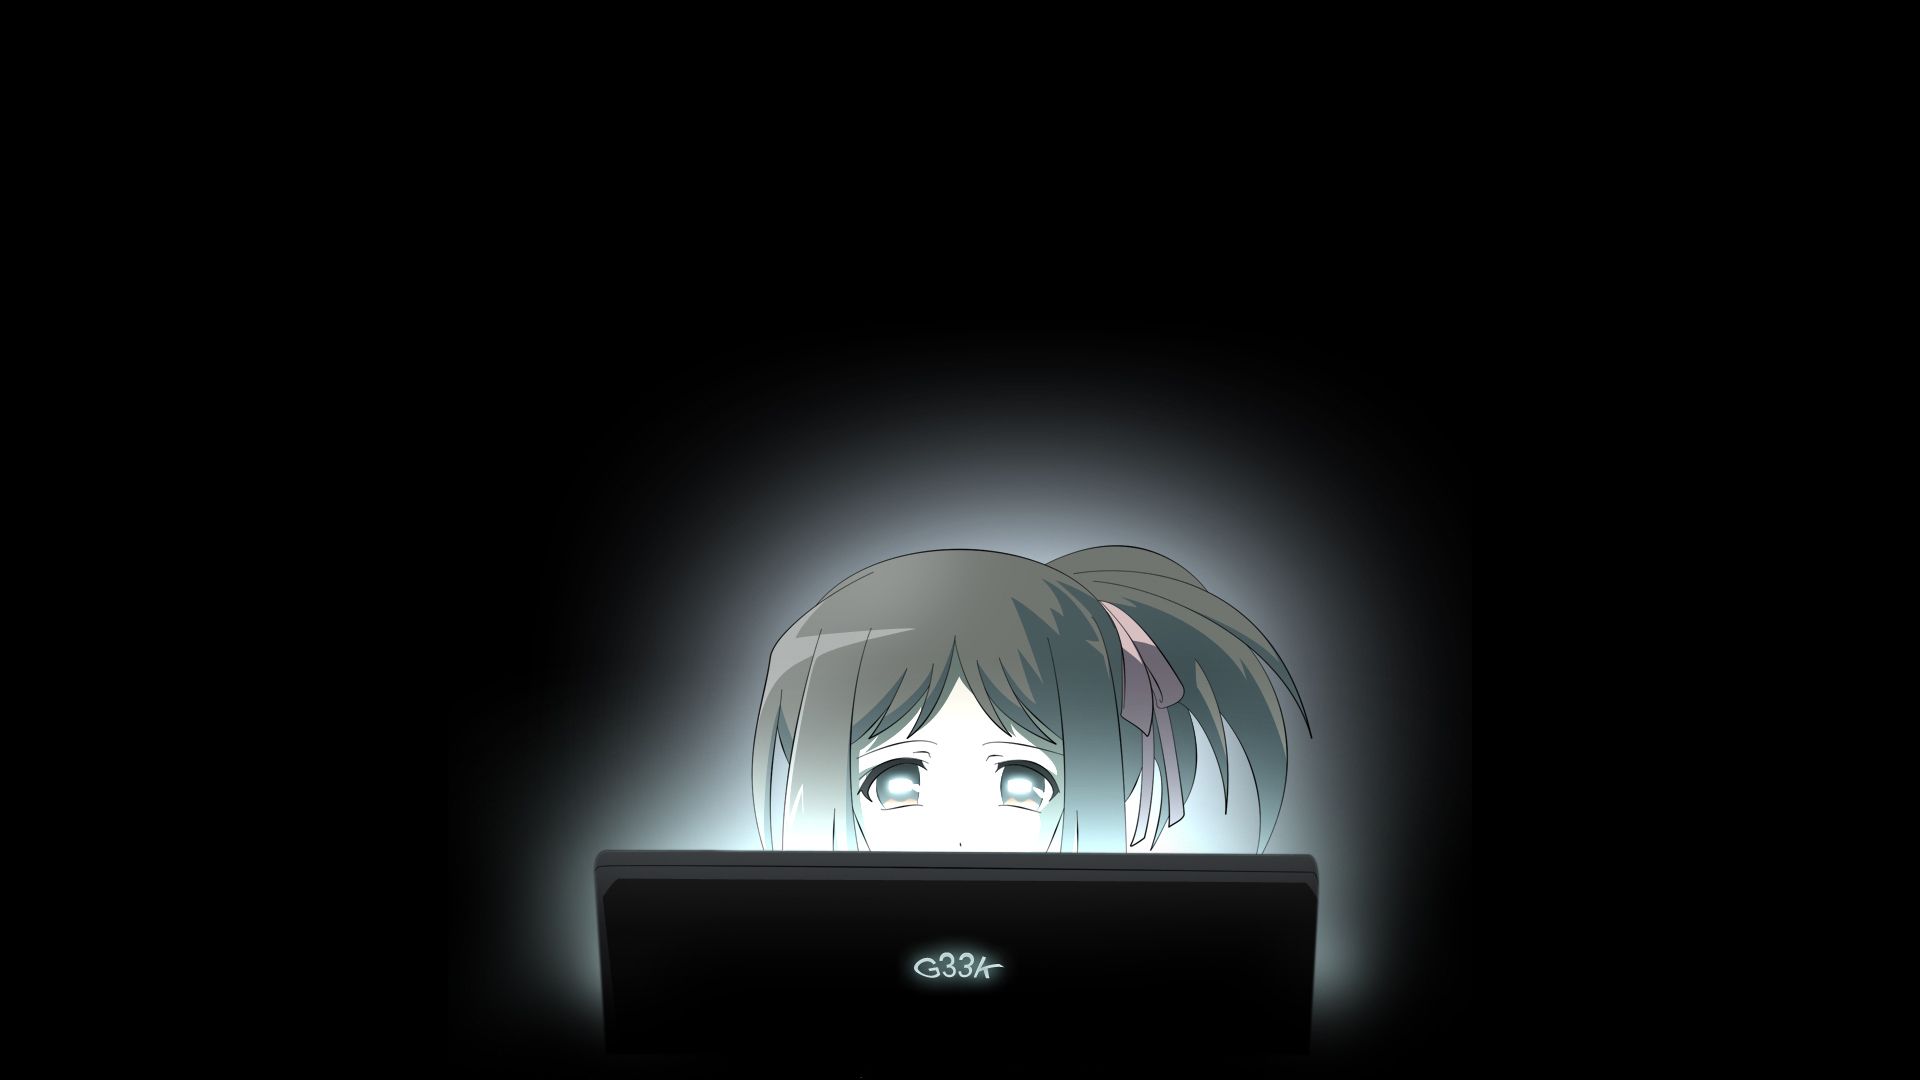 Geek by Night and Techie by Day & Breakup. Anime wallpaper 1920x Laptop wallpaper, Anime wallpaper